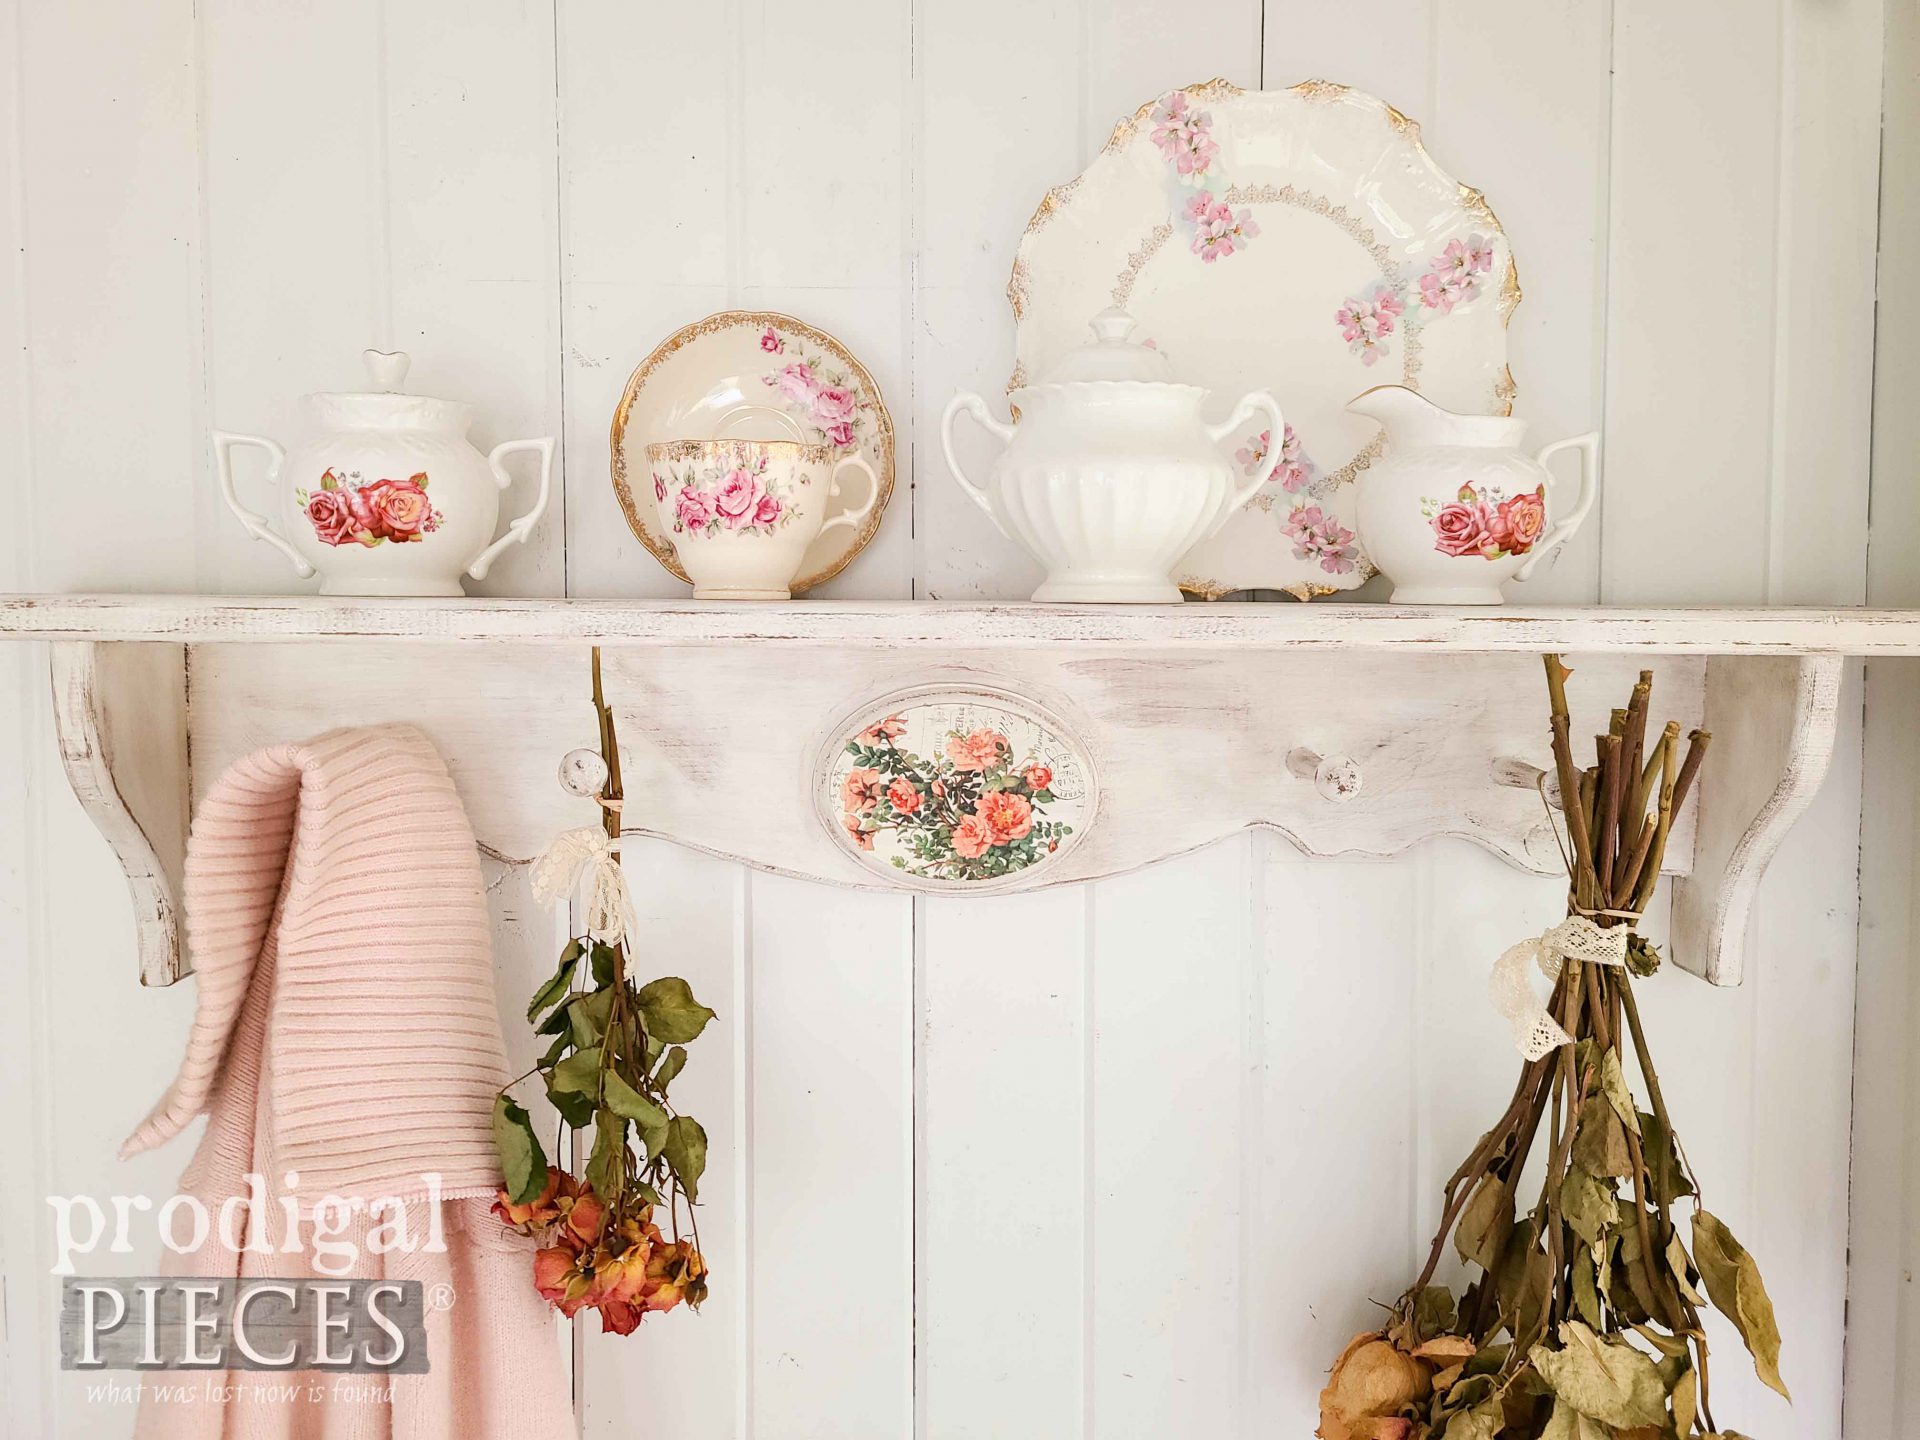 Vintage Shabby Chic Coat Rack Shelf for Thrifty Decor Makeovers by Prodigal Pieces | prodigalpieces.com #prodigalpieces #shabbychic #diy #home #homedecor